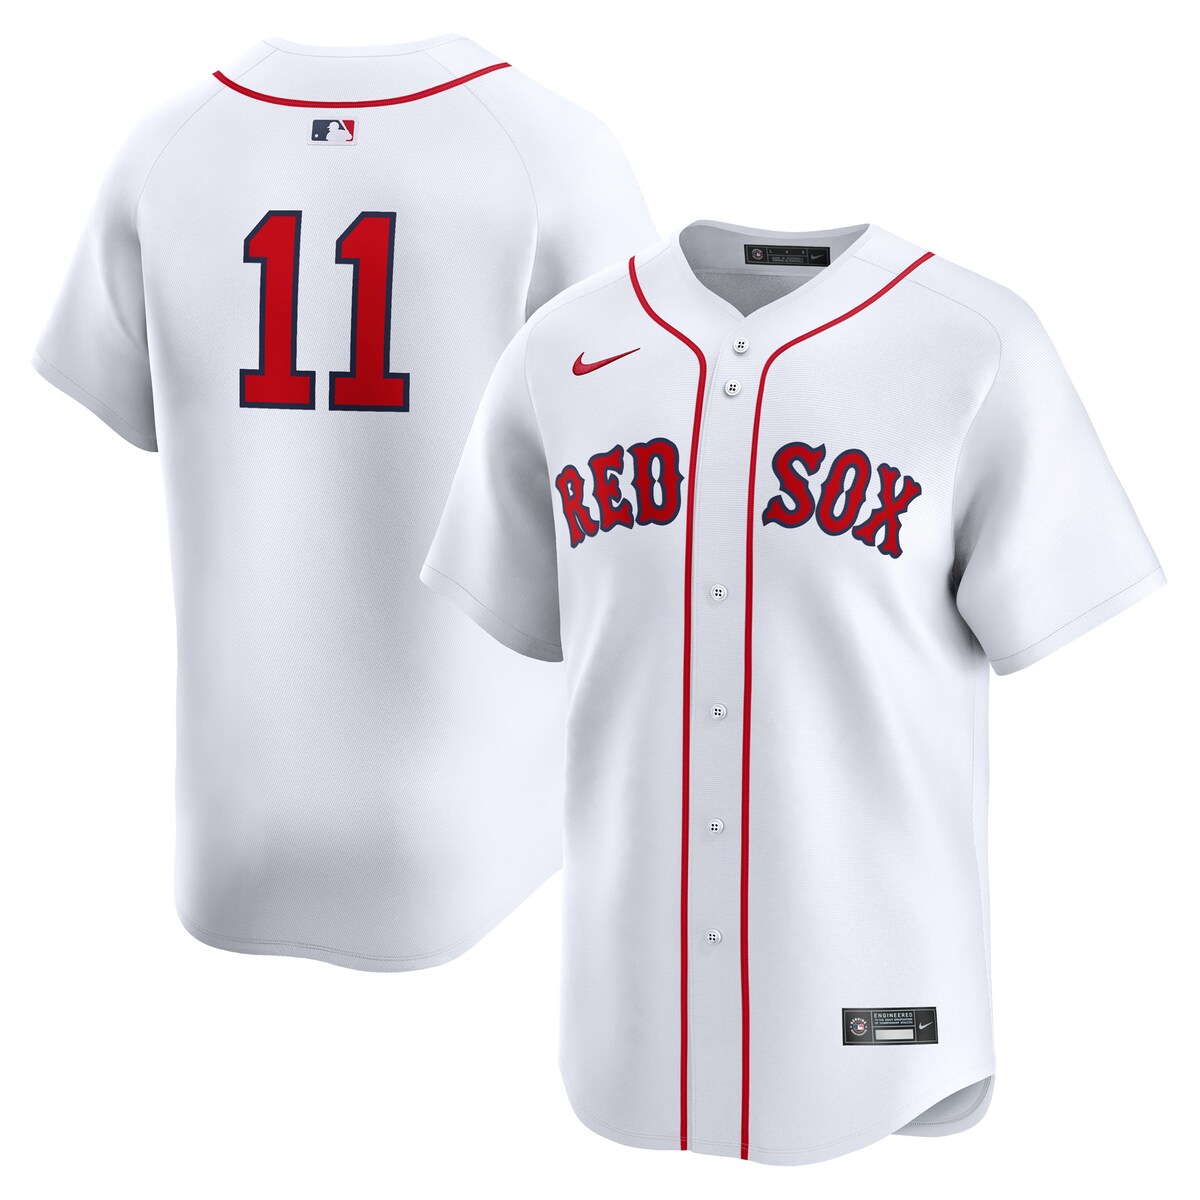 MLB bh\bNX t@GEf@[X z[ ~ebh jtH[ Nike iCL LbY zCg (2024 Nike Youth Limited Player Jerseys - FTF NTP Master Style)